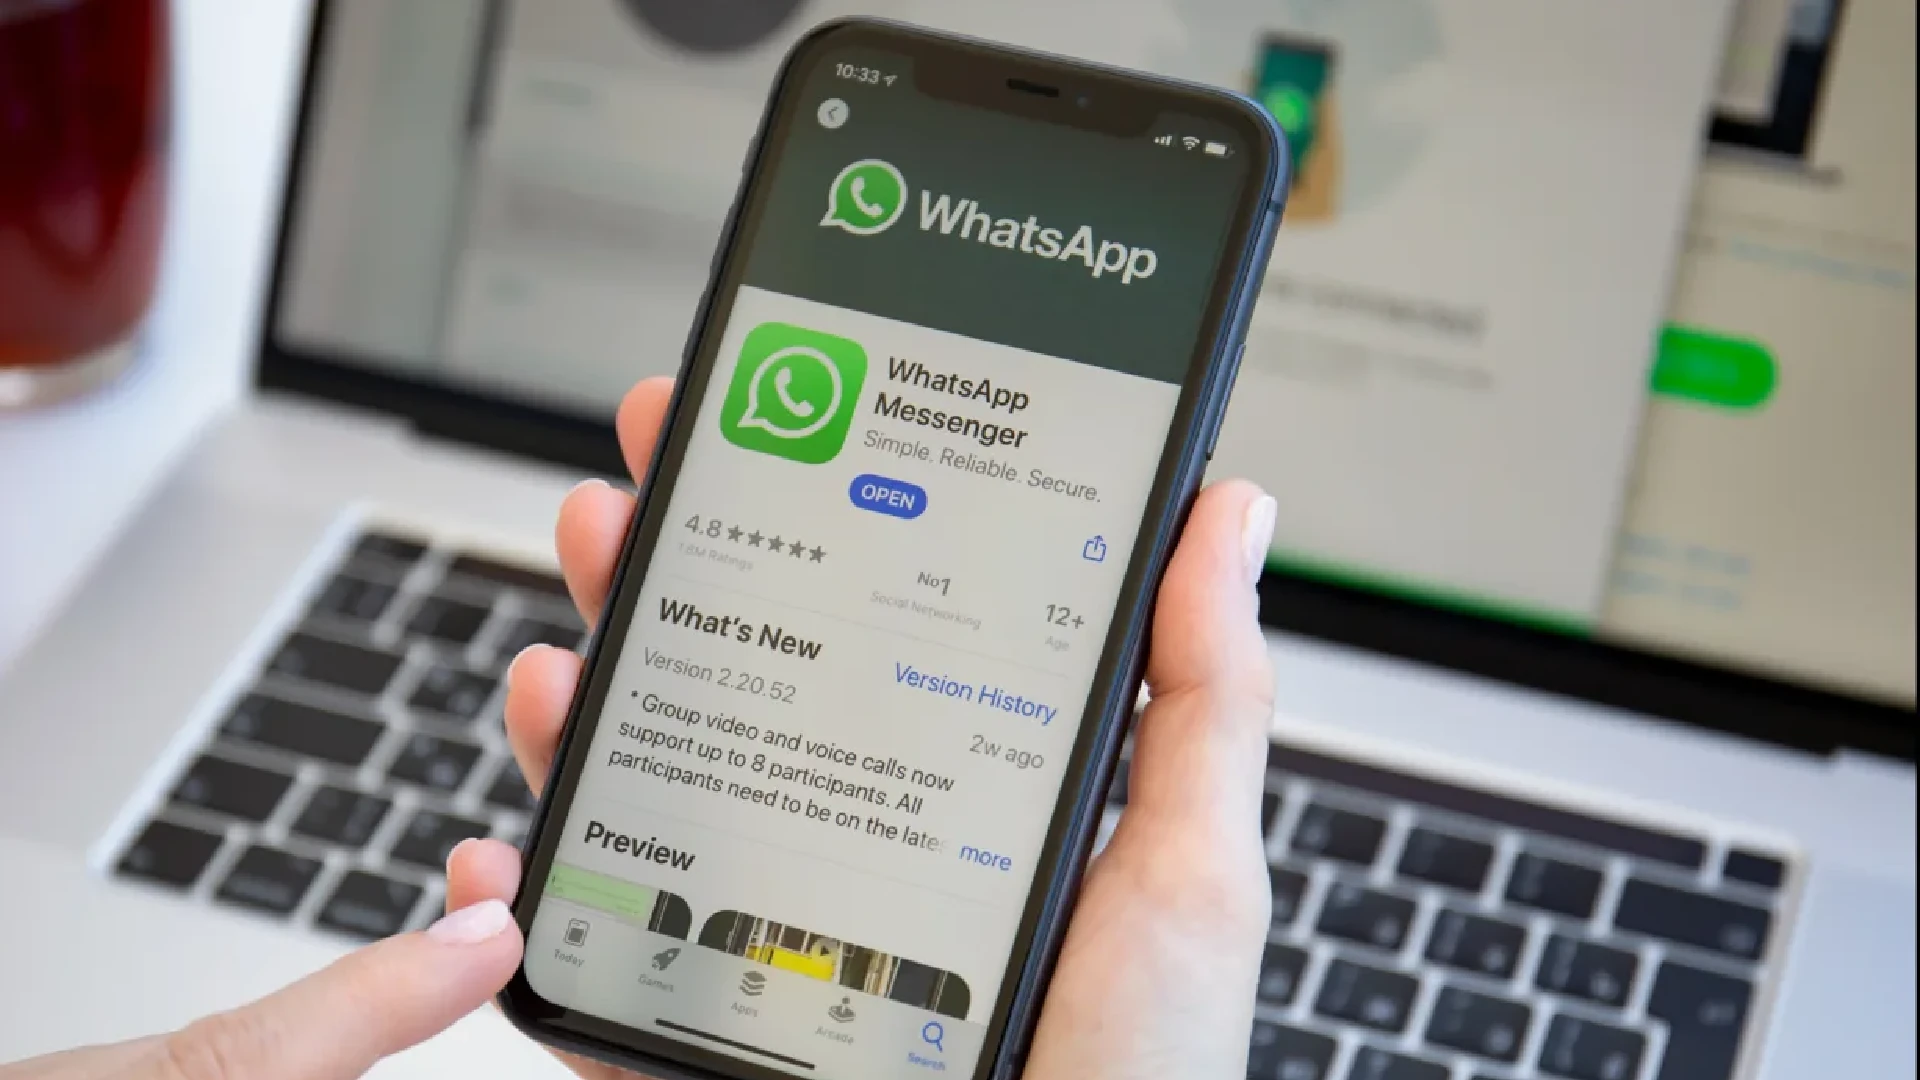 WhatsApp to Make a Feature to Organize Users’ Cloud Storage Better